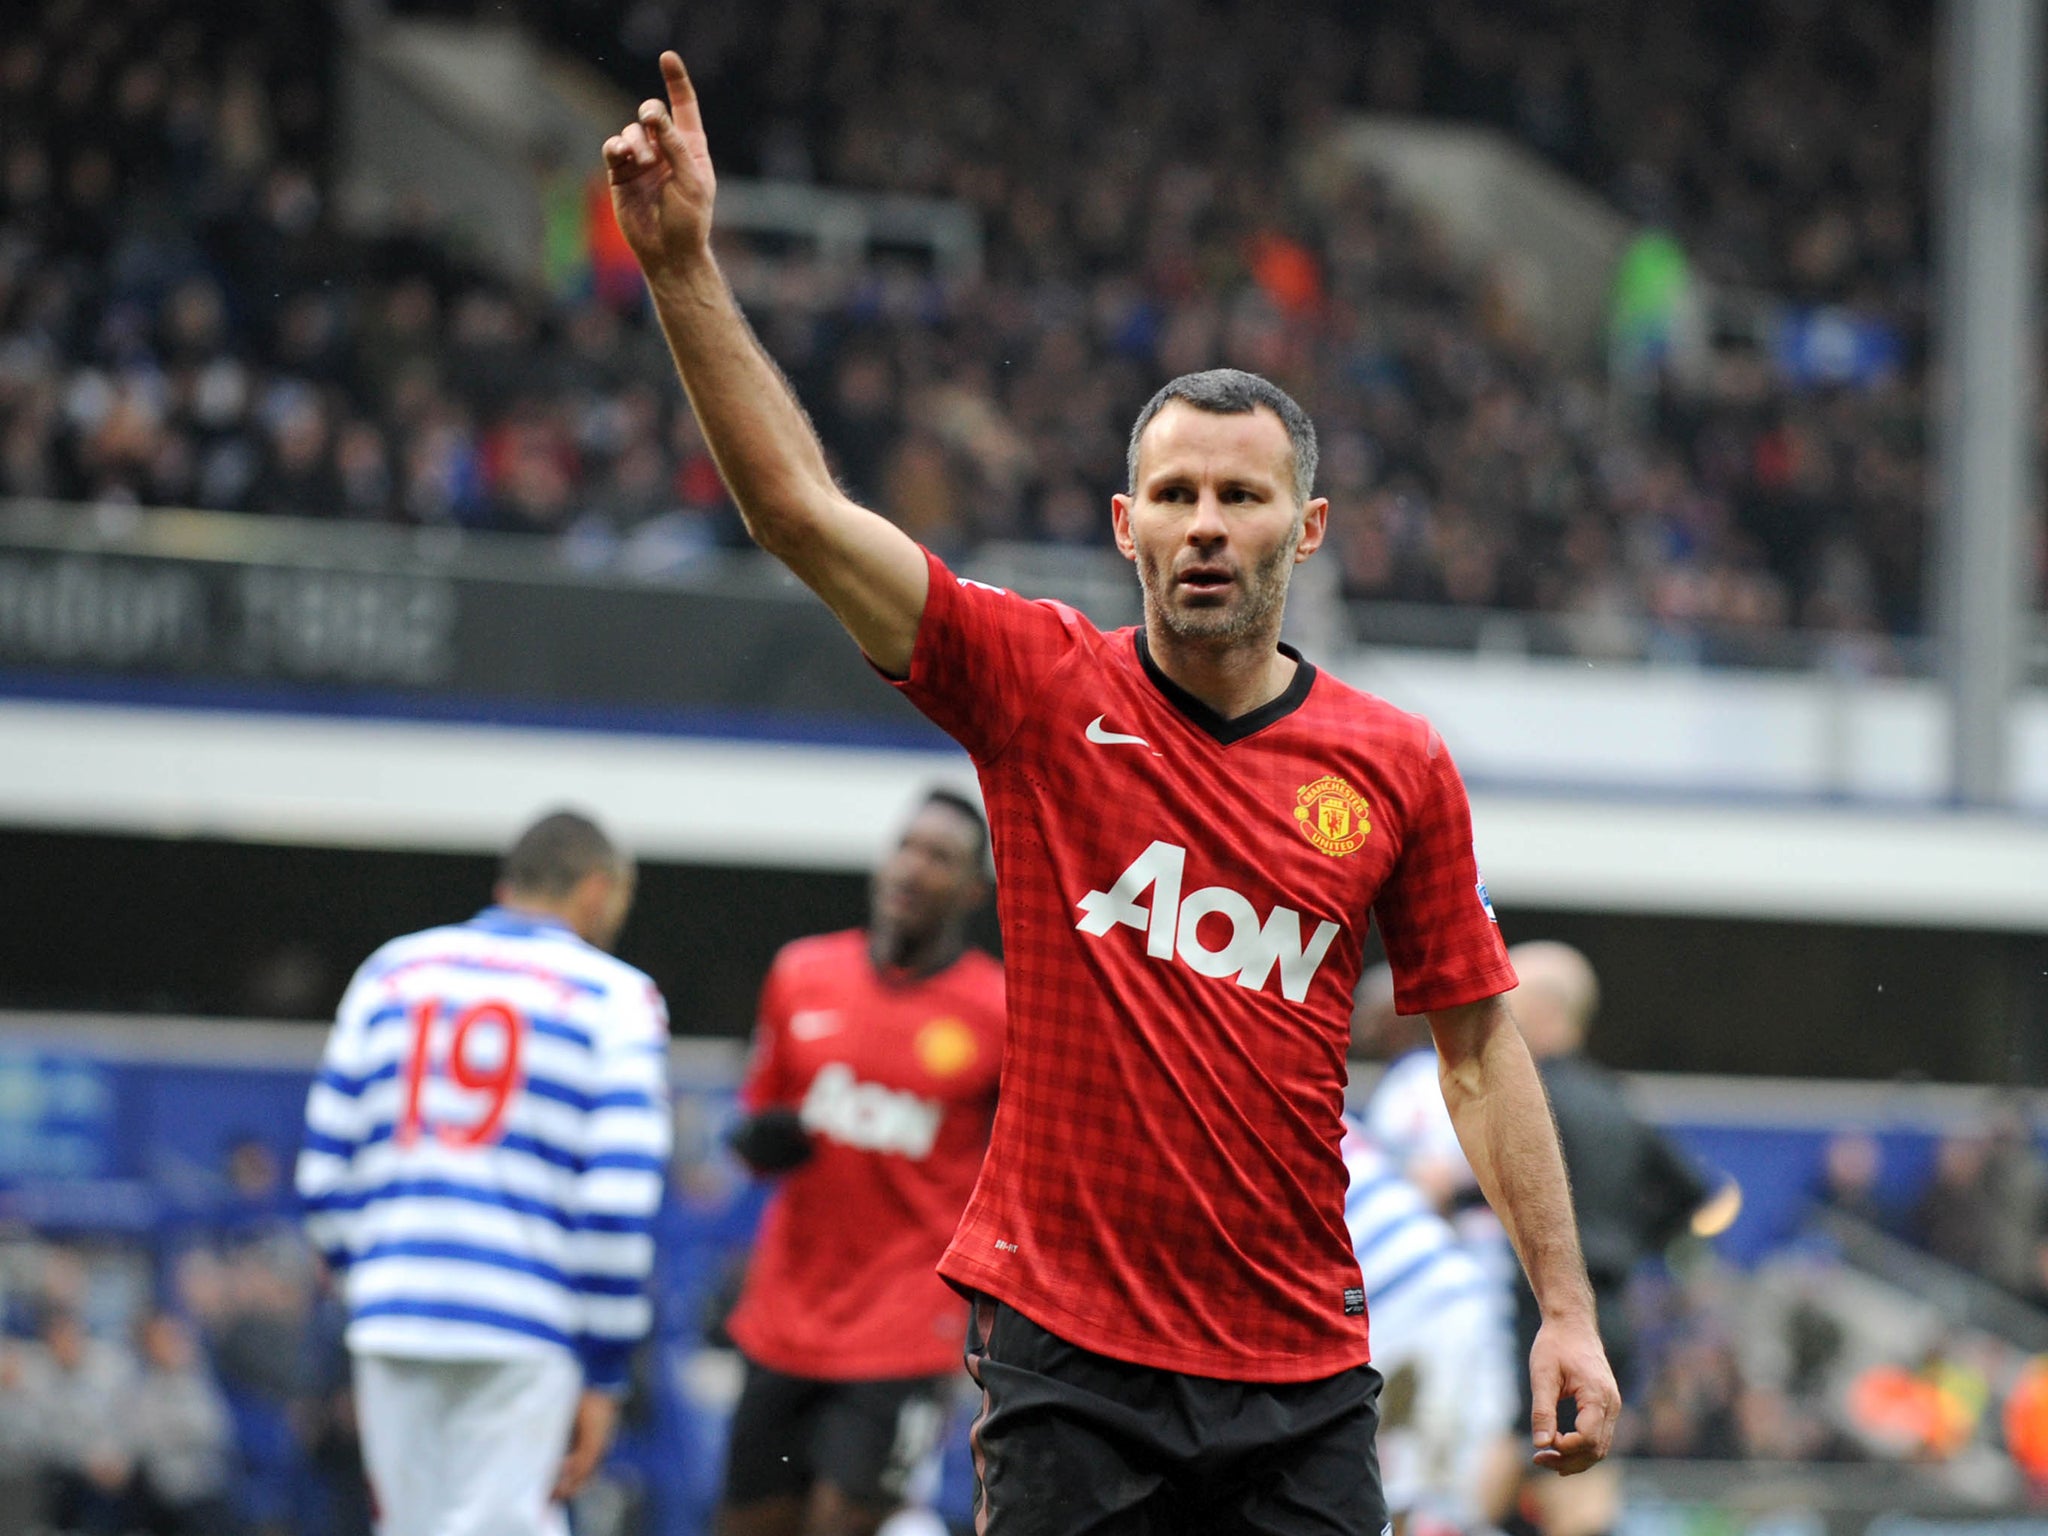 Ryan Giggs (18 appearances, 2 goals): Delivered more than could be reasonably expected of a 39-year-old, especially after such a dodgy start. Goal against Everton in February means he is still only man to score in every Premier League campaign. 8